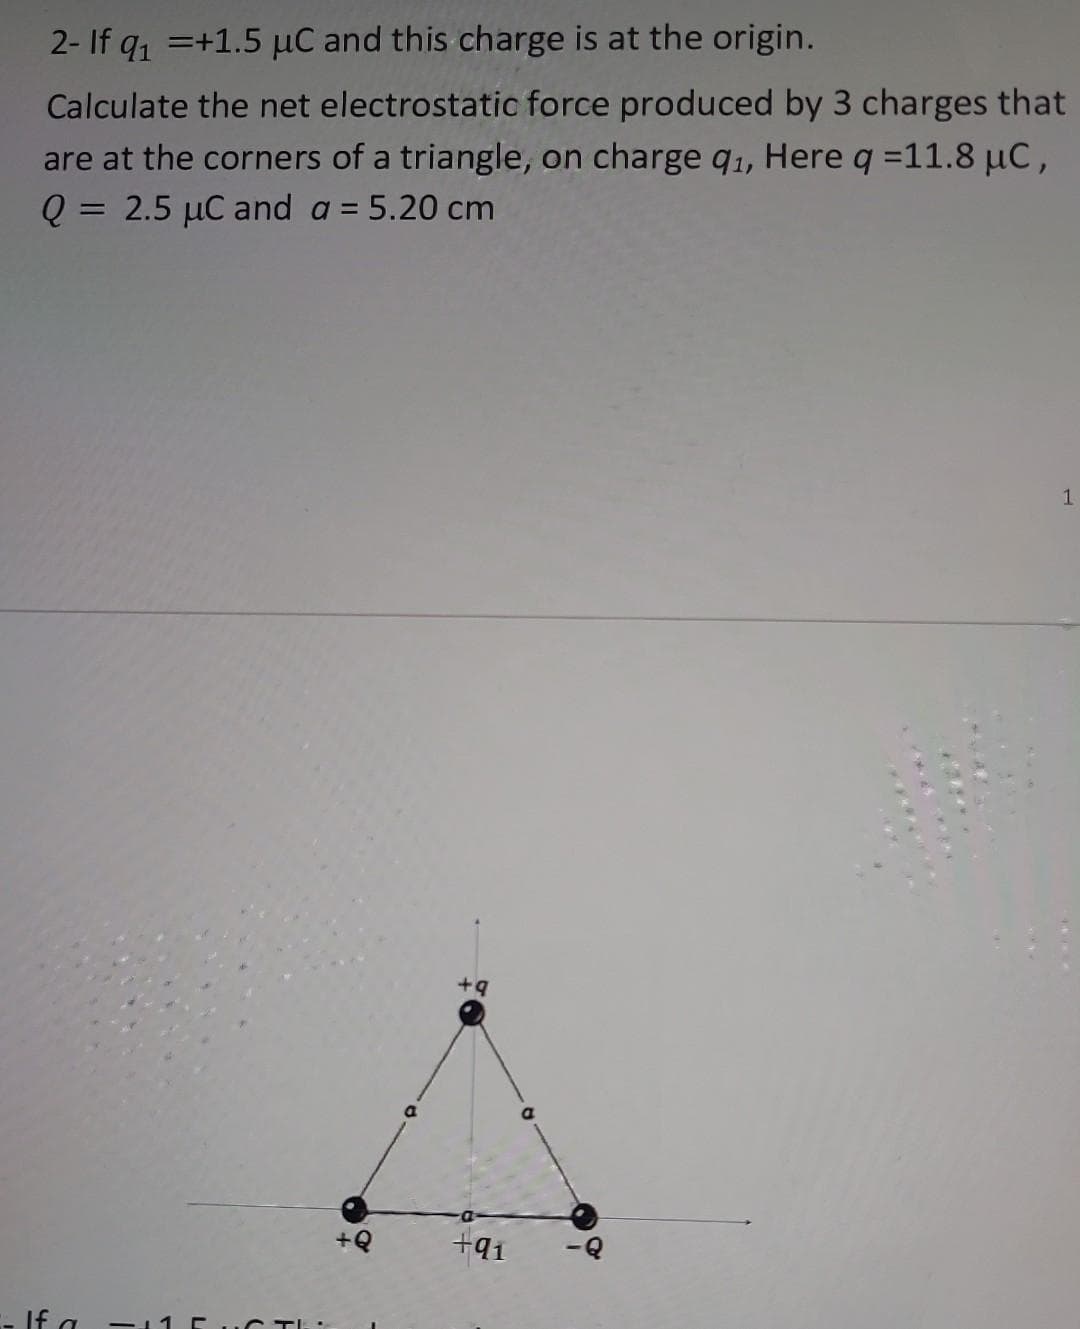 2- If q₁ +1.5 μC and this charge is at the origin.
Calculate the net electrostatic force produced by 3 charges that
are at the corners of a triangle, on charge q₁, Here q =11.8 μC,
Q = 2.5 μC and a = 5.20 cm
+Q
+9
+91
a
1